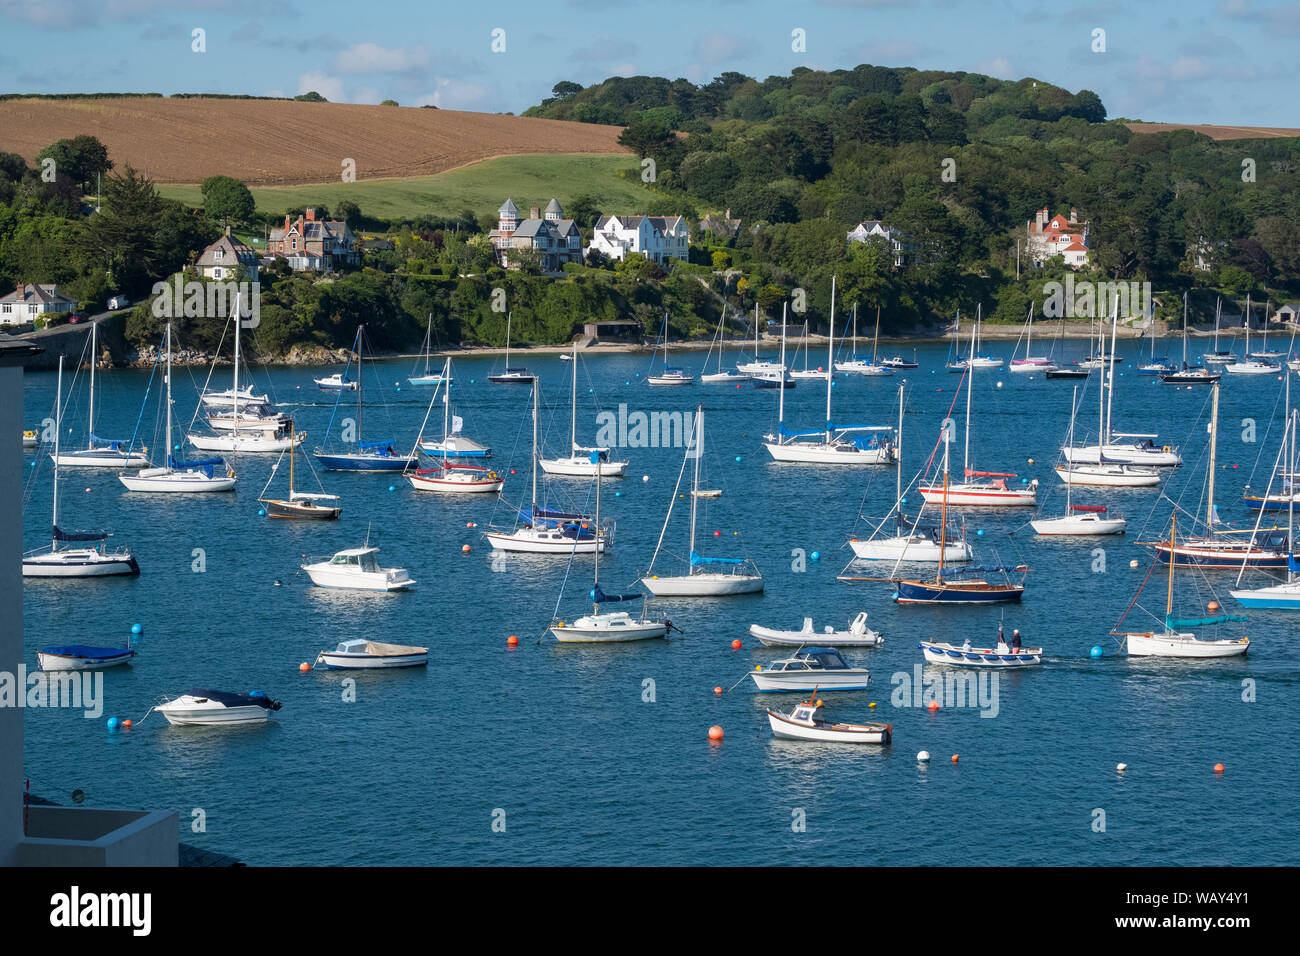 Boats moored at Falmouth harbour looking towards St Mawes, Cornwall, England, UK Stock Photo